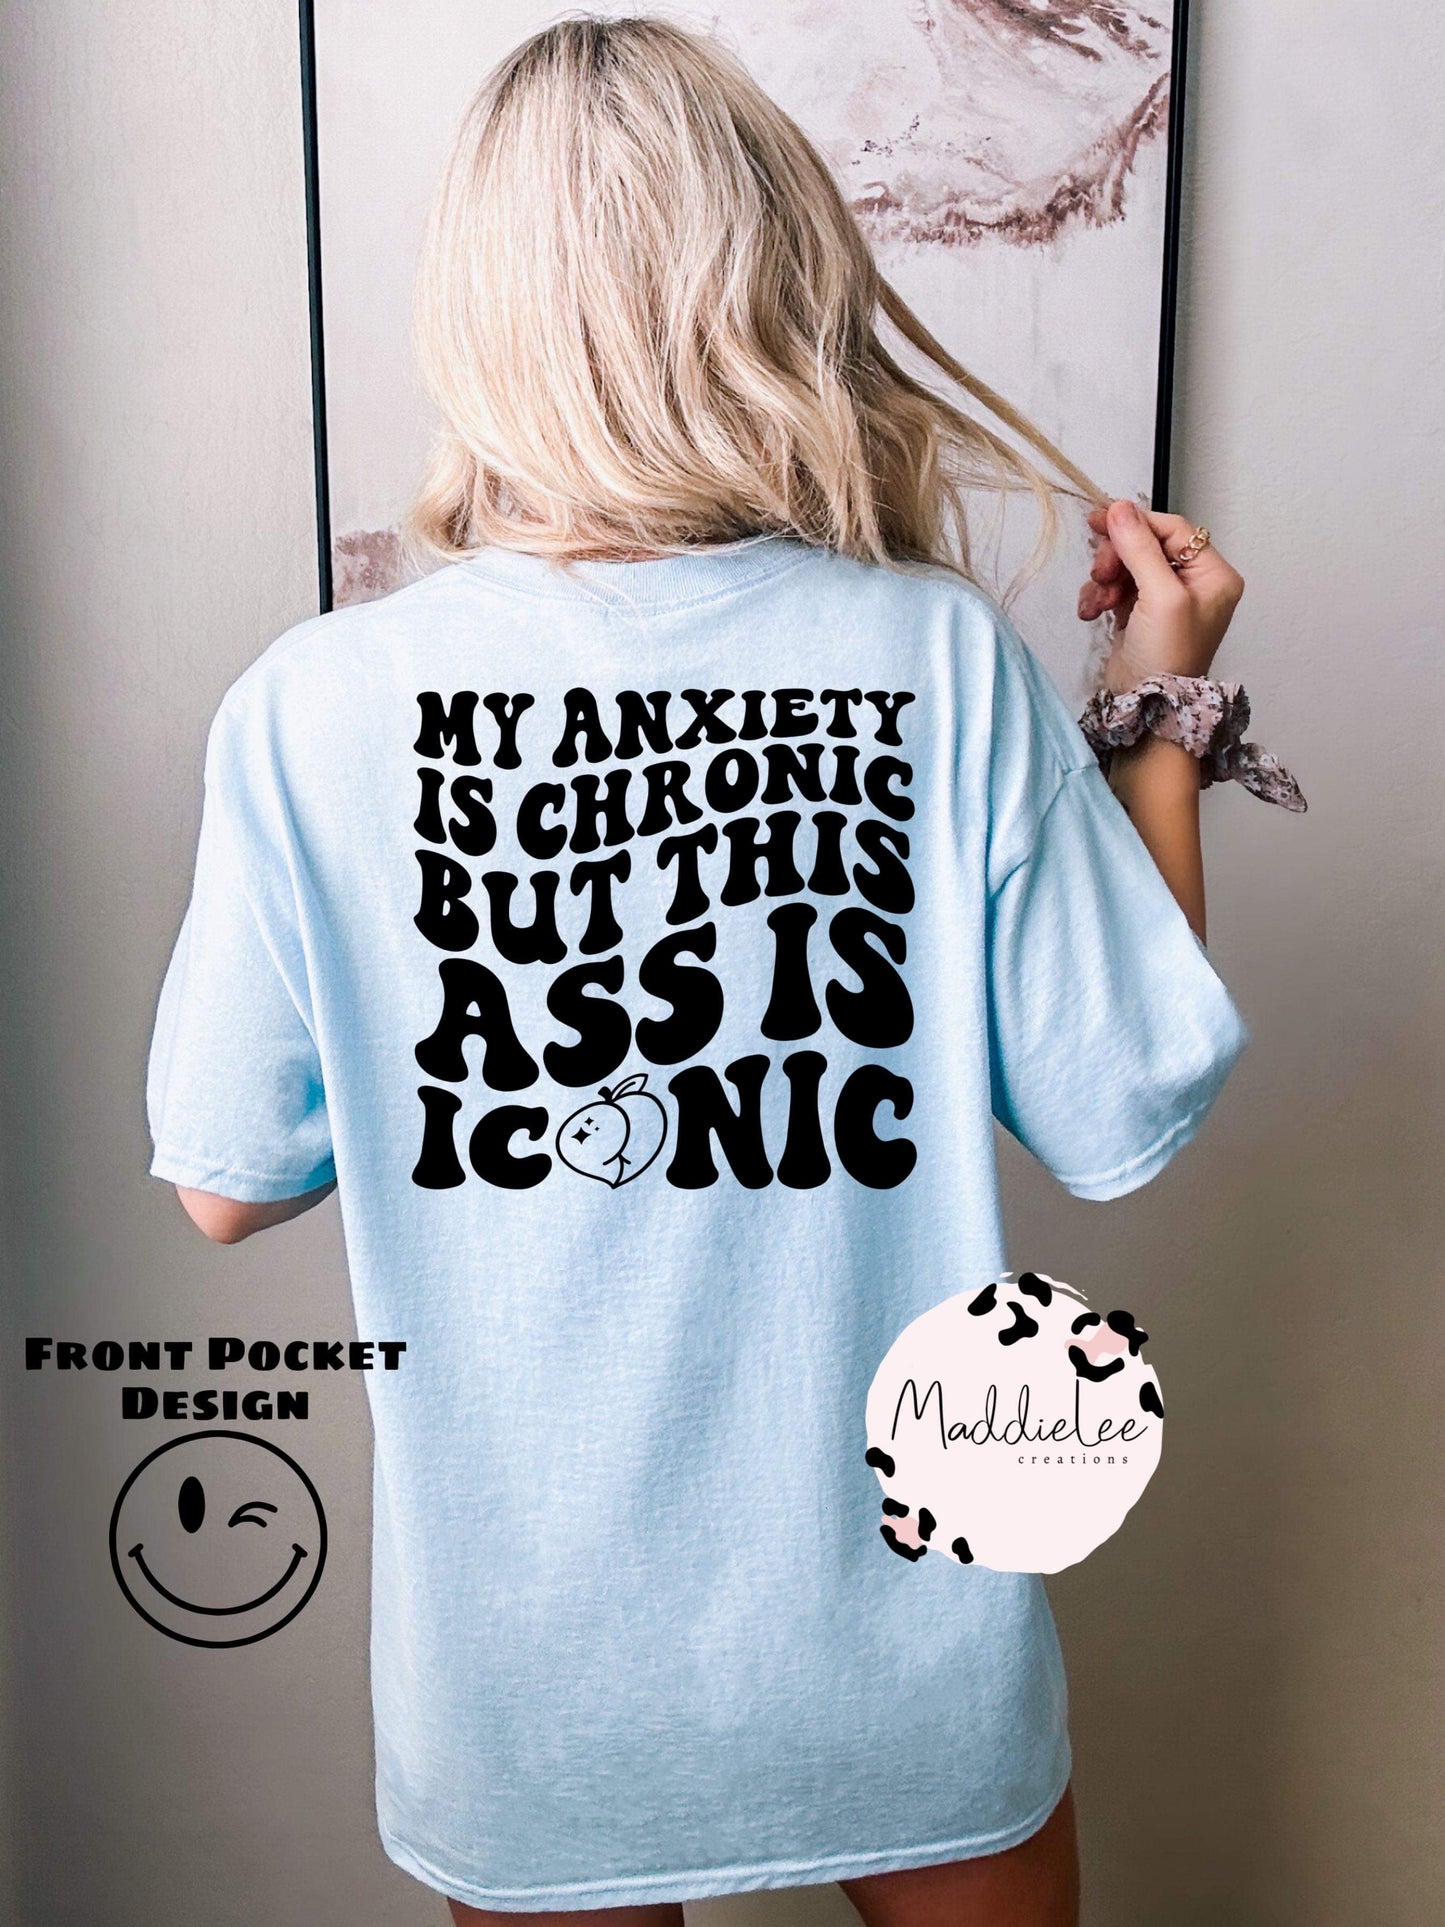 Anxiety is Chronic, But this Ass is Iconic